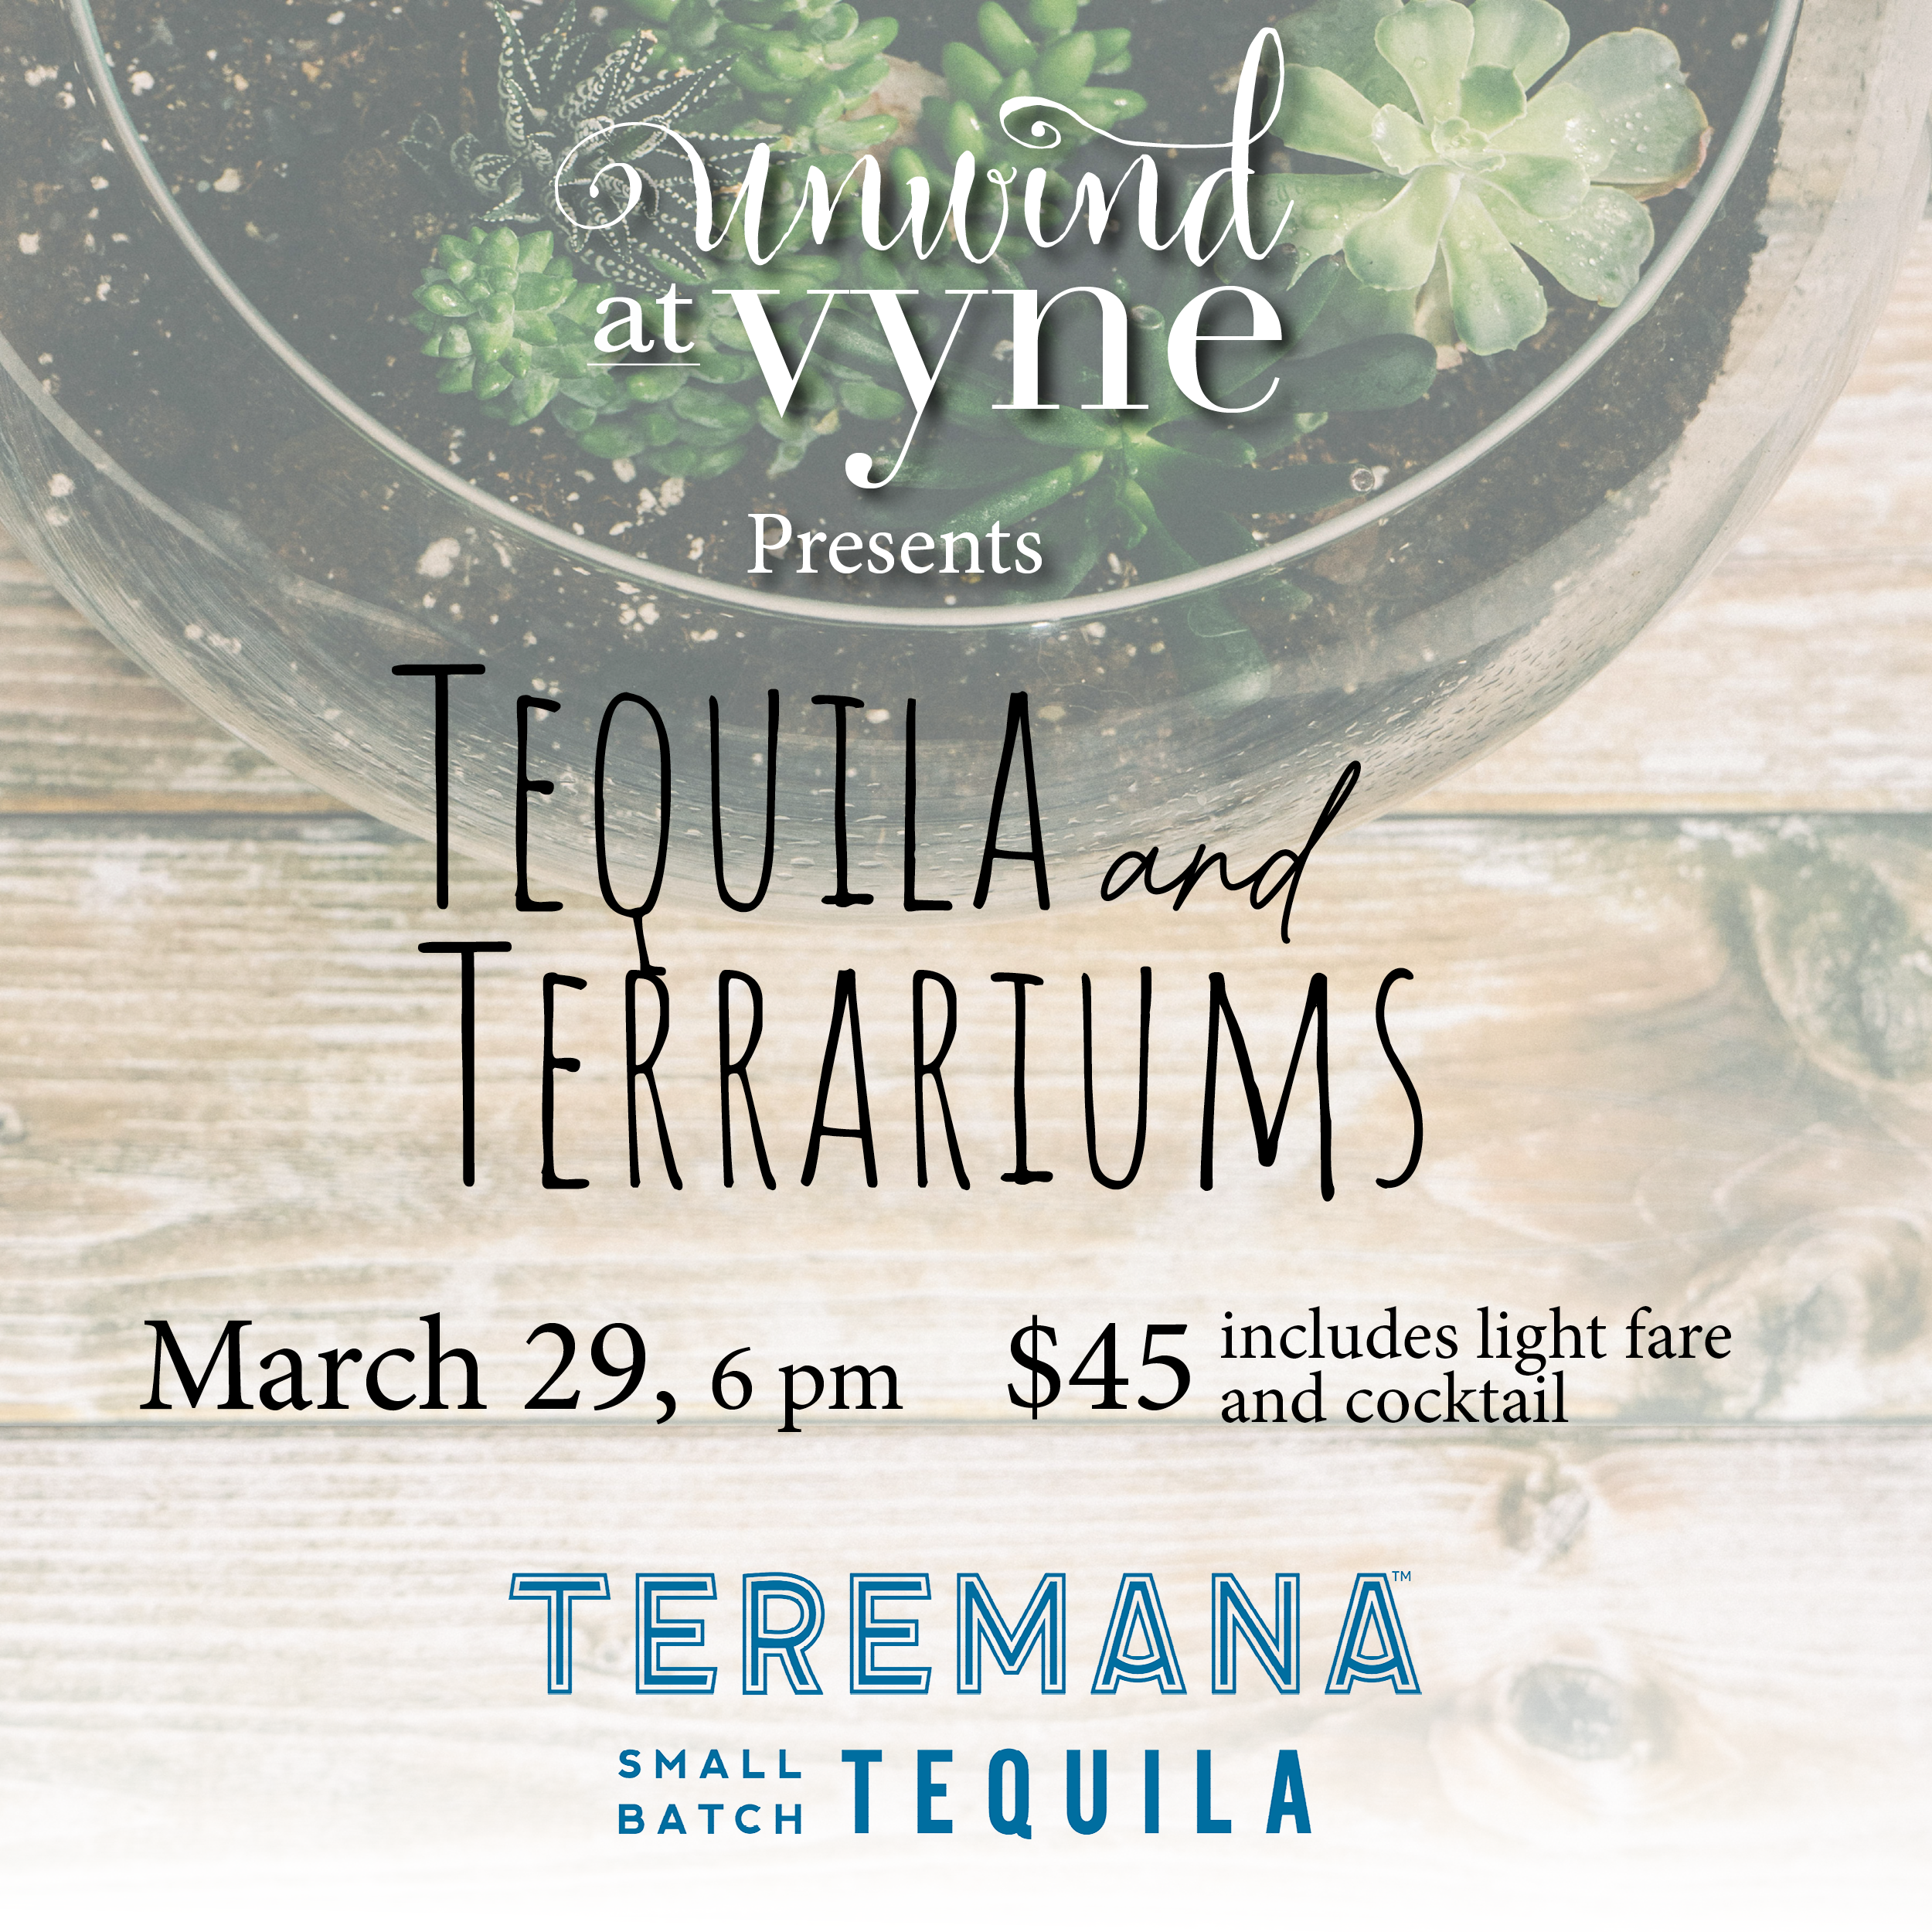 Tequila and Terrariums